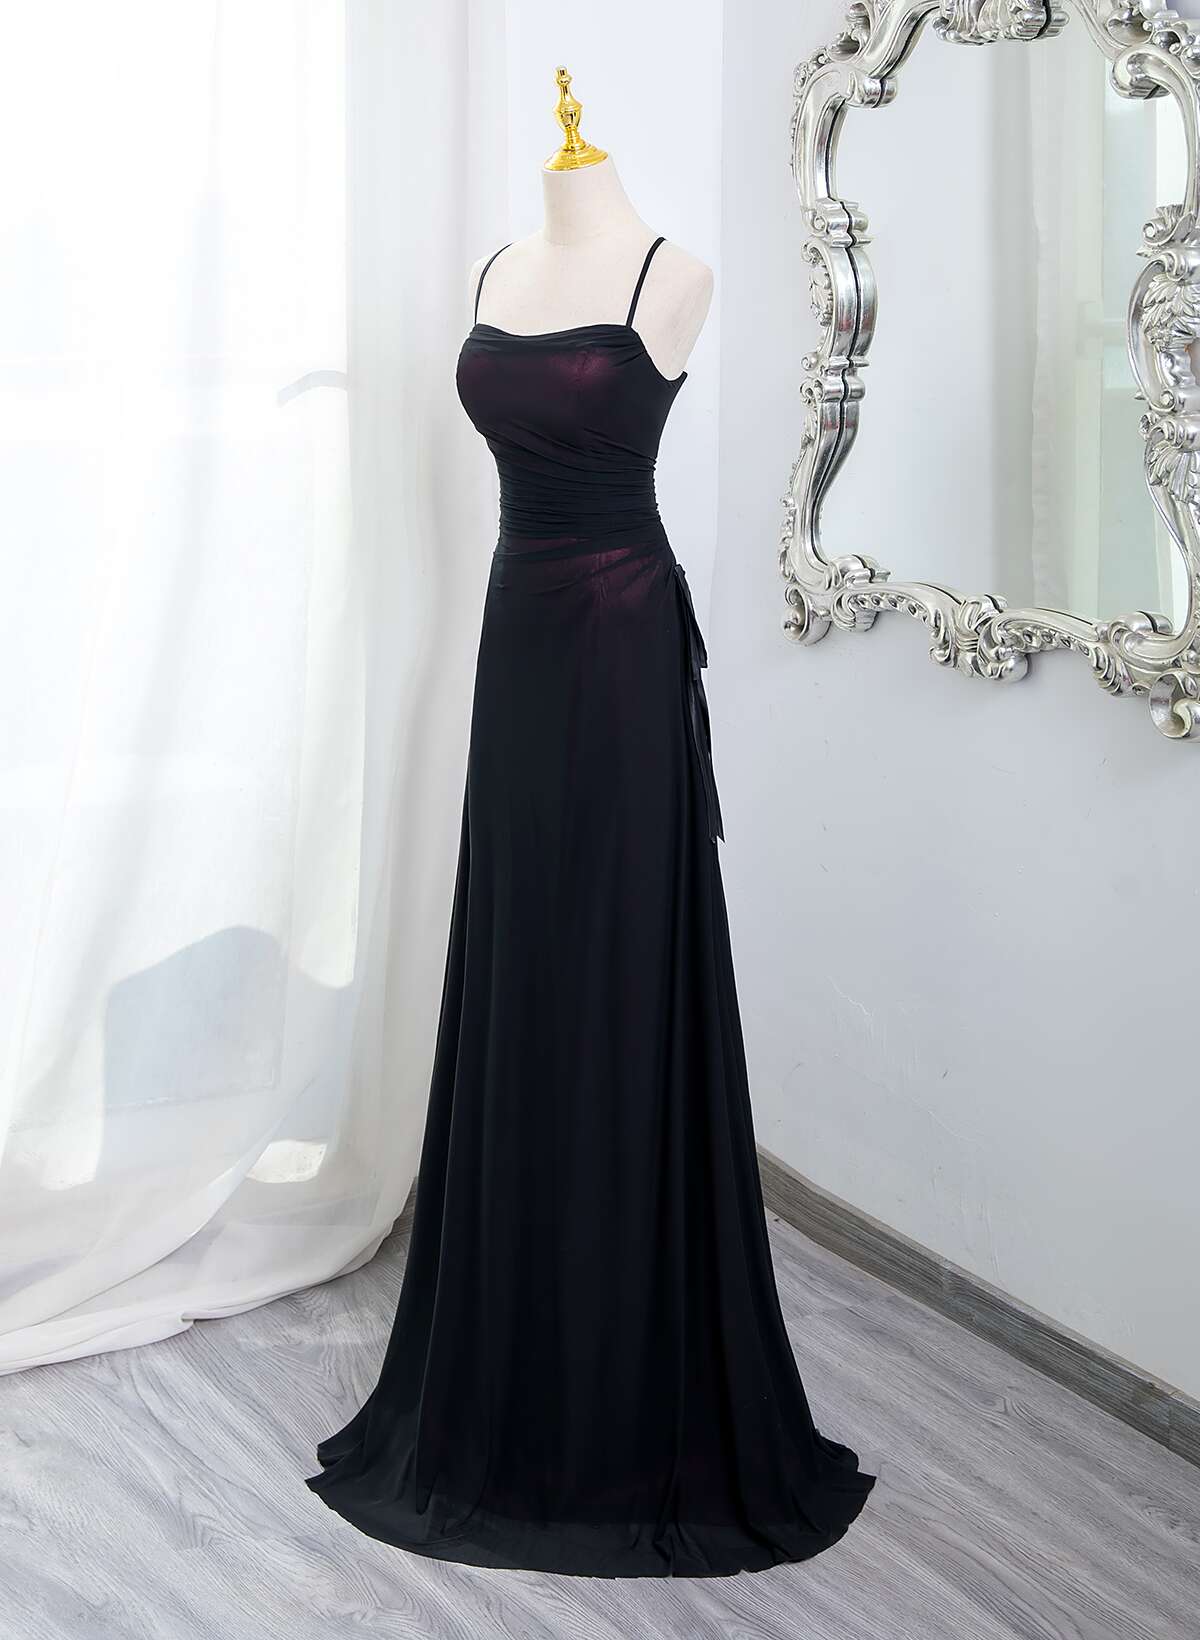 Black and Burgundy Scoop Straps Lace-up Long Party Dress, Simple Long Prom Dress